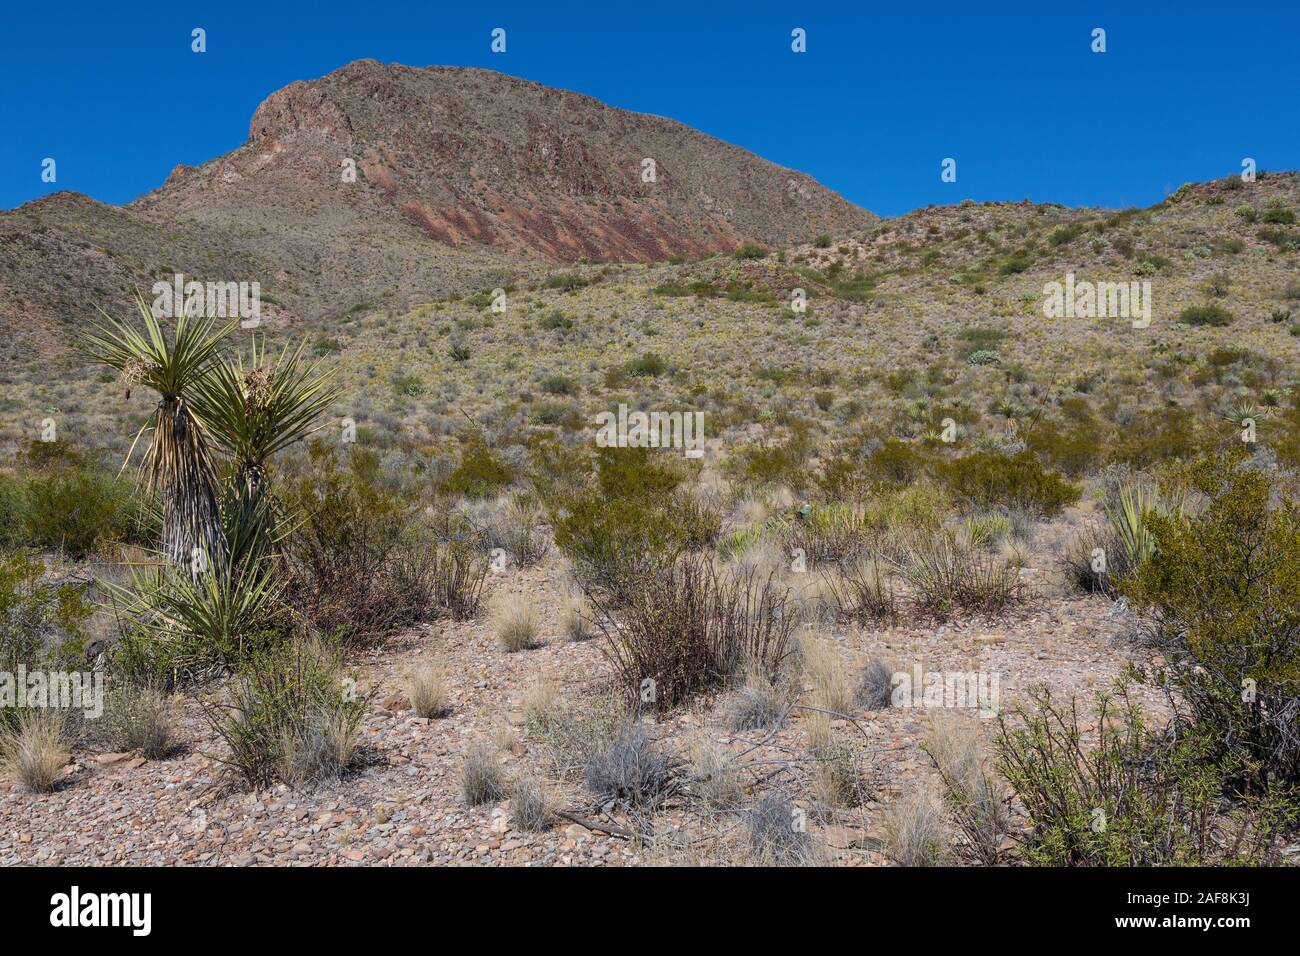 Big Bend National Park, Texas. Scenic View from Mule Ears Spring Trail, Yucca on Left. Stock Photo